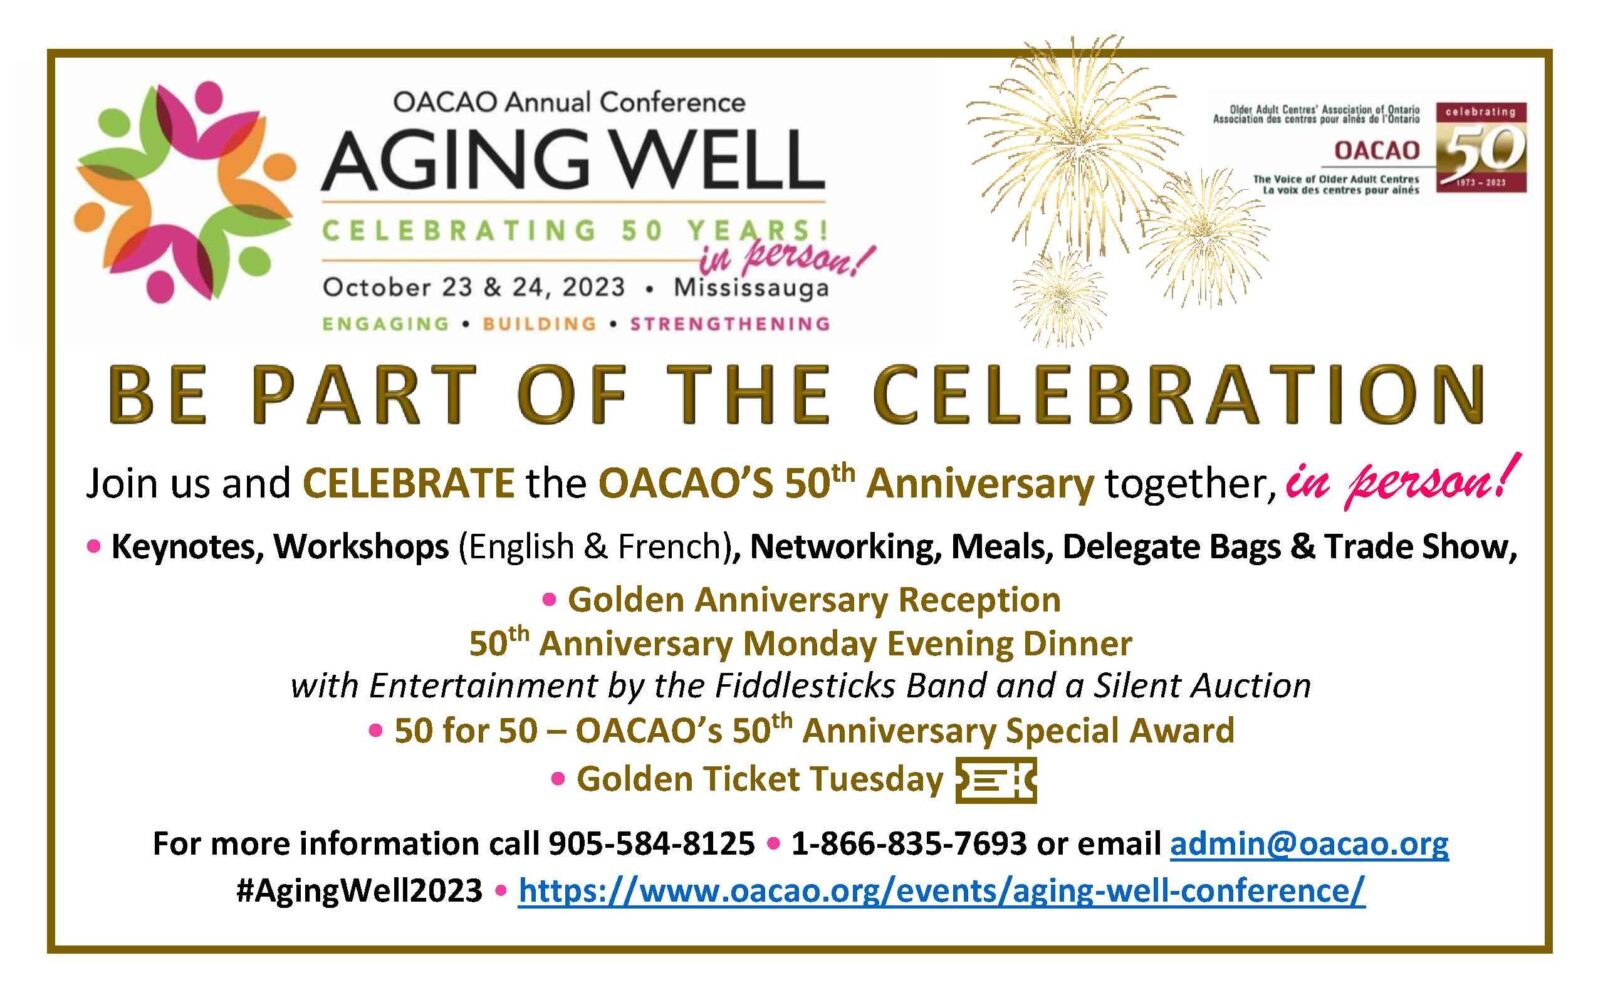 Aging Well Conference OACAO